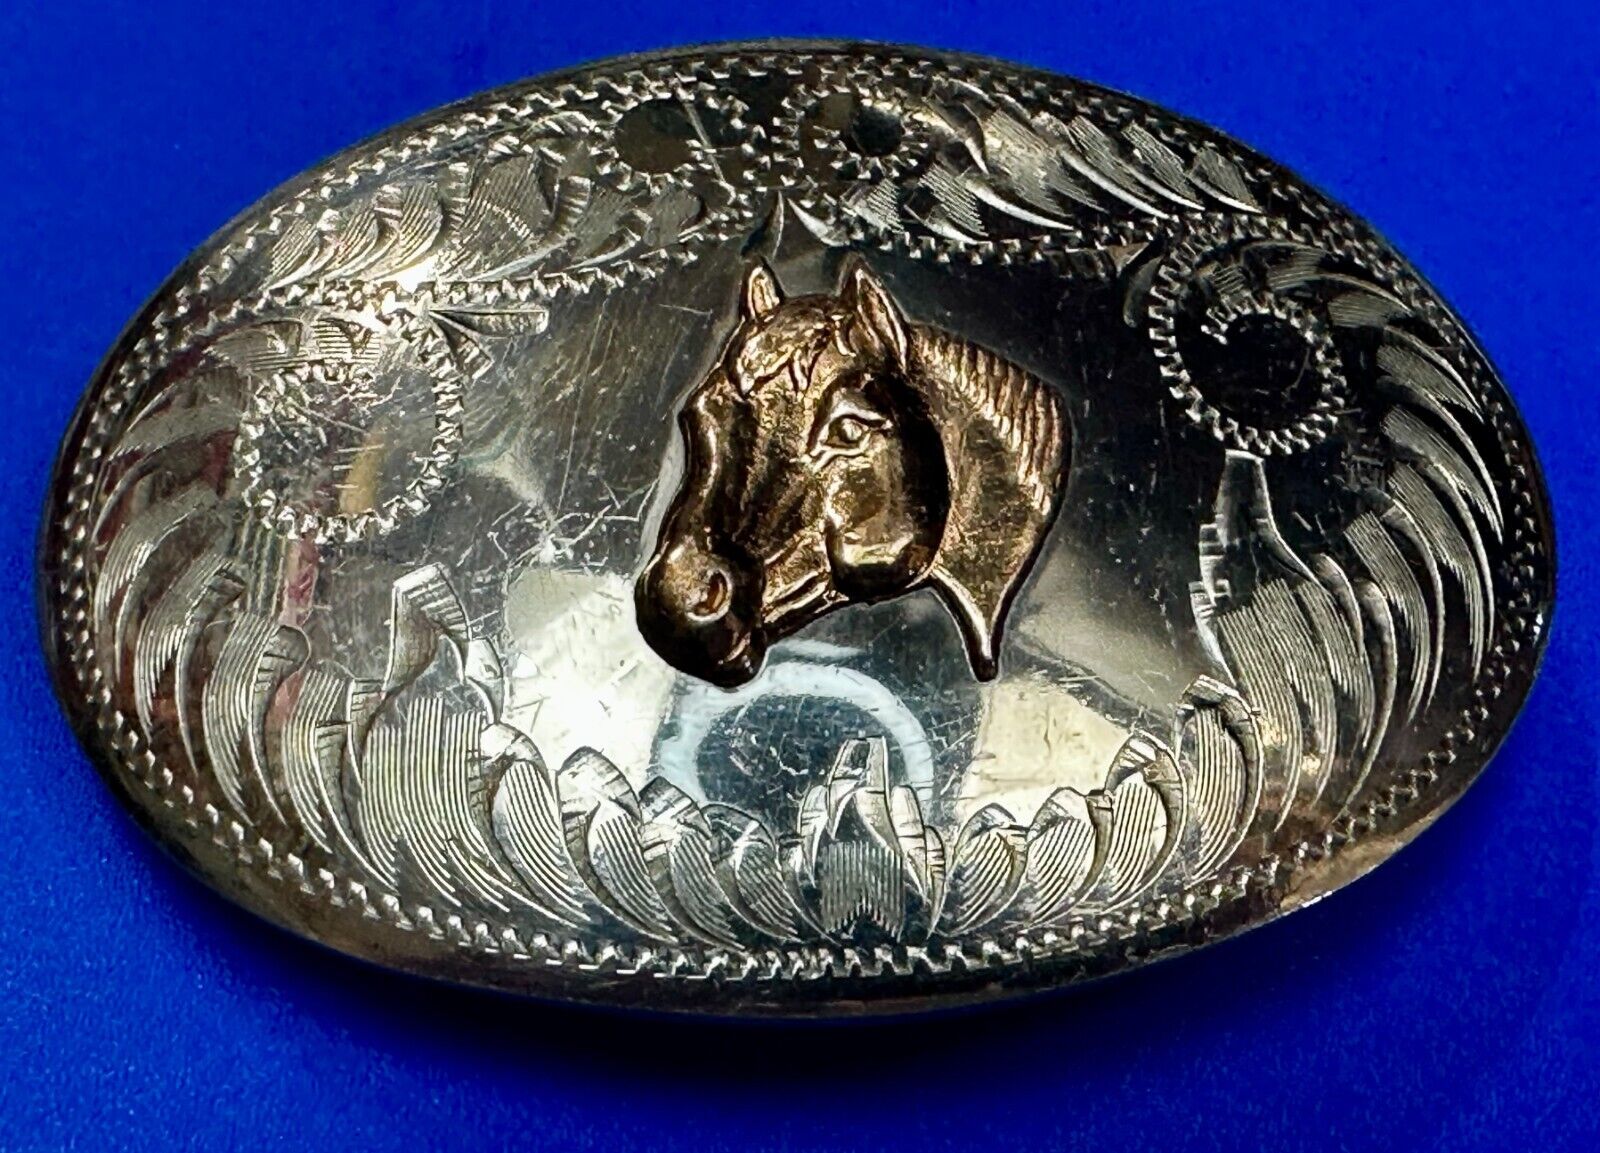 Gorgeous Horse Head - Vintage German Silver Belt Buckle by Comstock Silversmiths